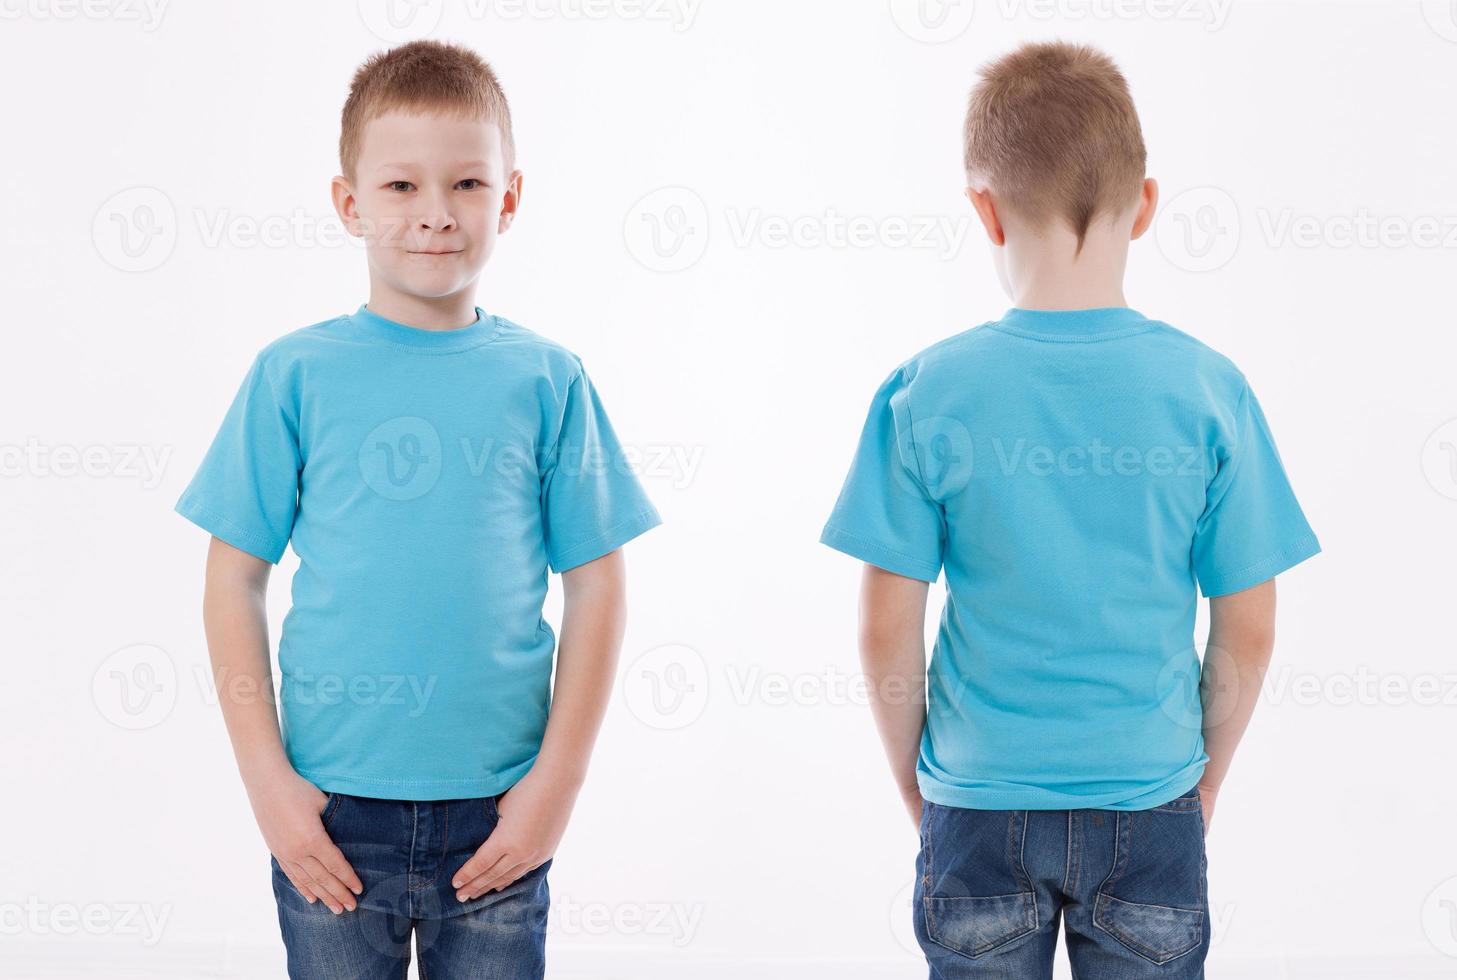 Shirt design and people concept - close up of young man in blank blue tshirt front and rear isolated. Mock up template for design print photo